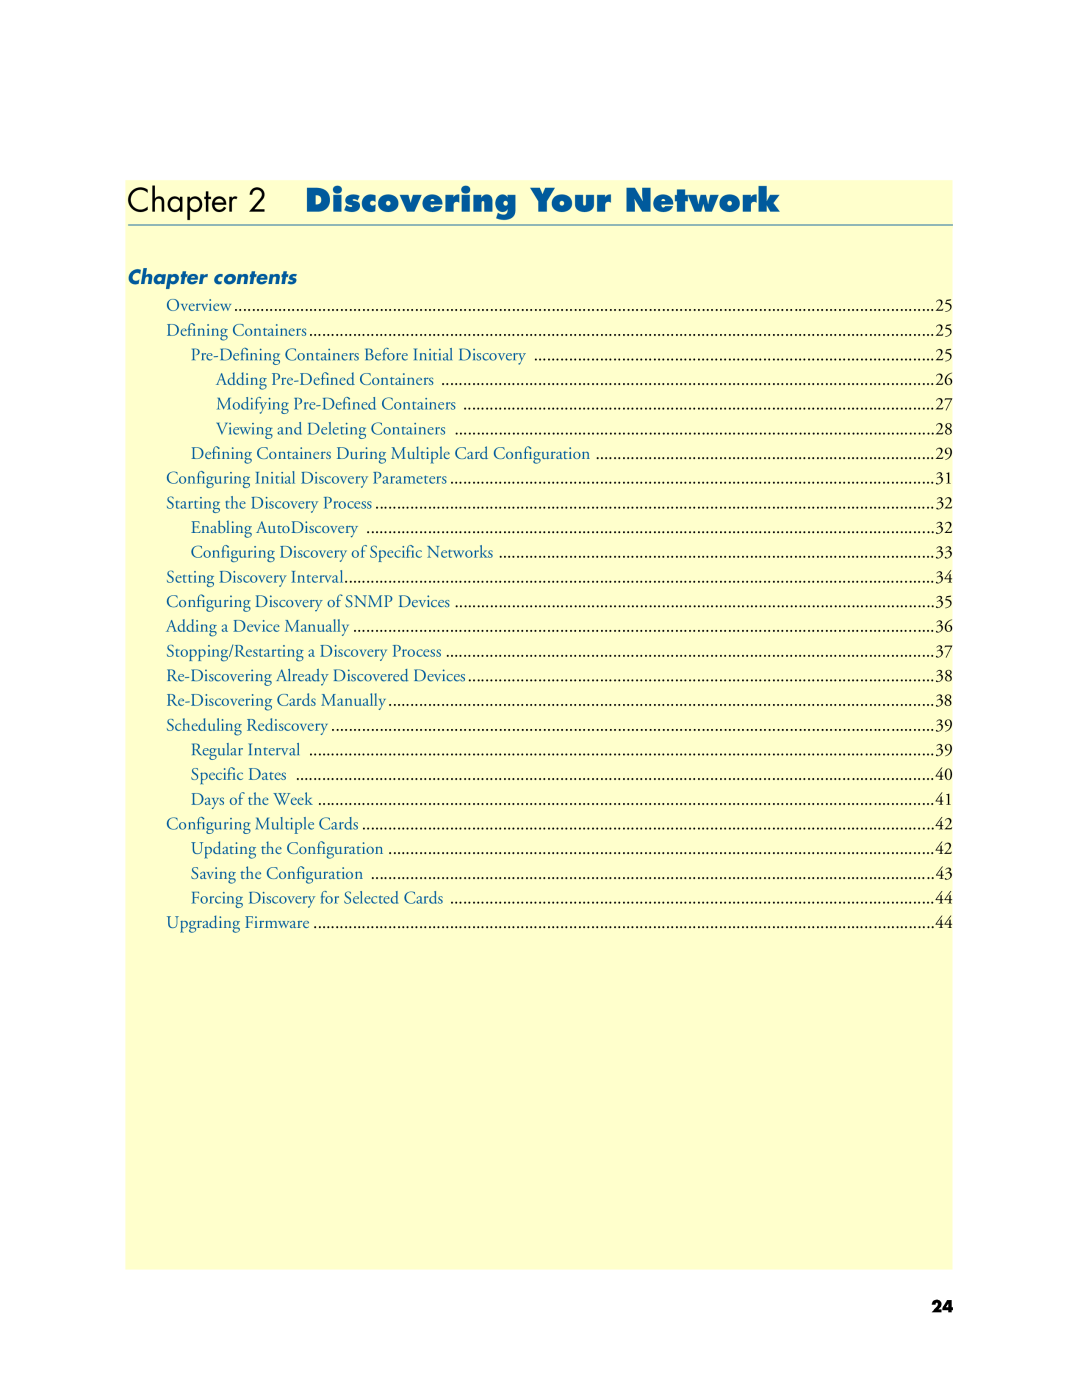 Patton electronic 6300 user manual Discovering Your Network, Chapter contents 